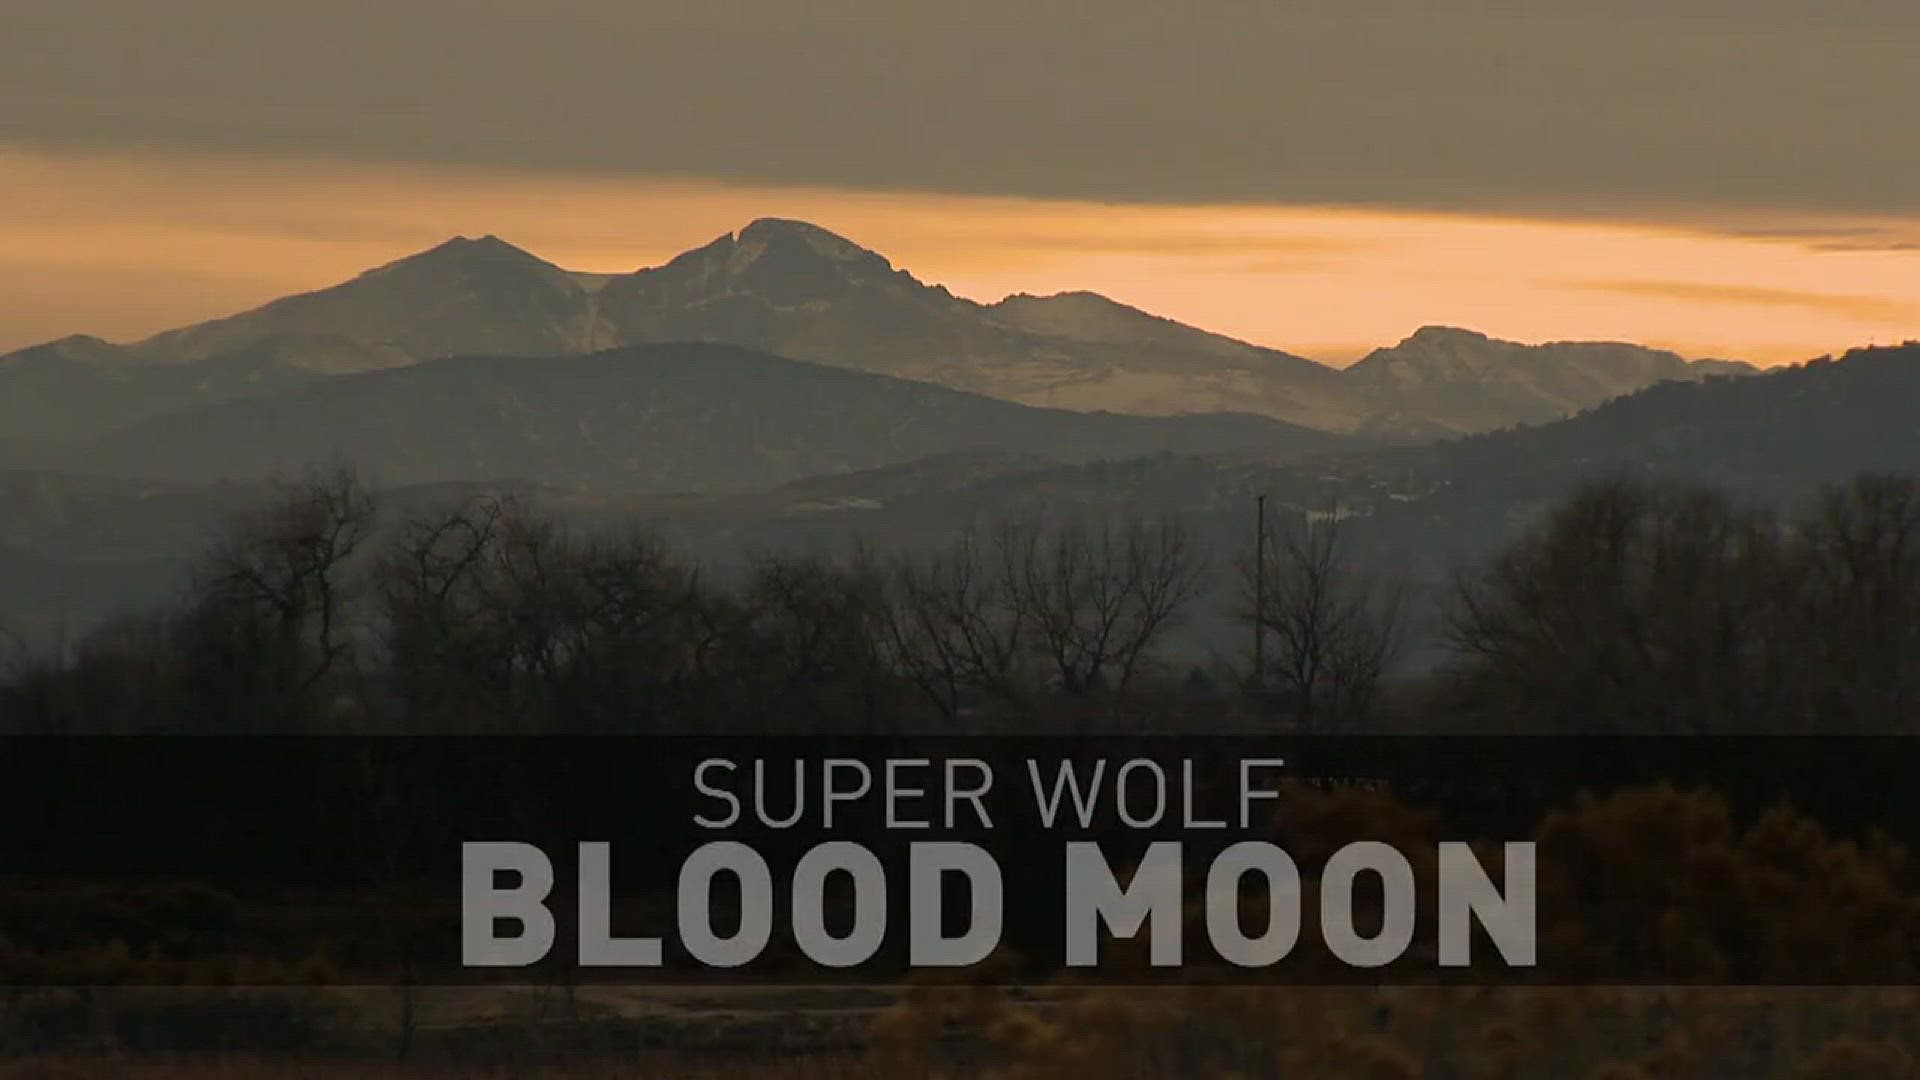 Revisit the rare Super Wolf Blood Moon with some excited folks in Fort Collins and meet a guitar kid with some serious talent to round out our staff picks for Monday, Jan. 21.